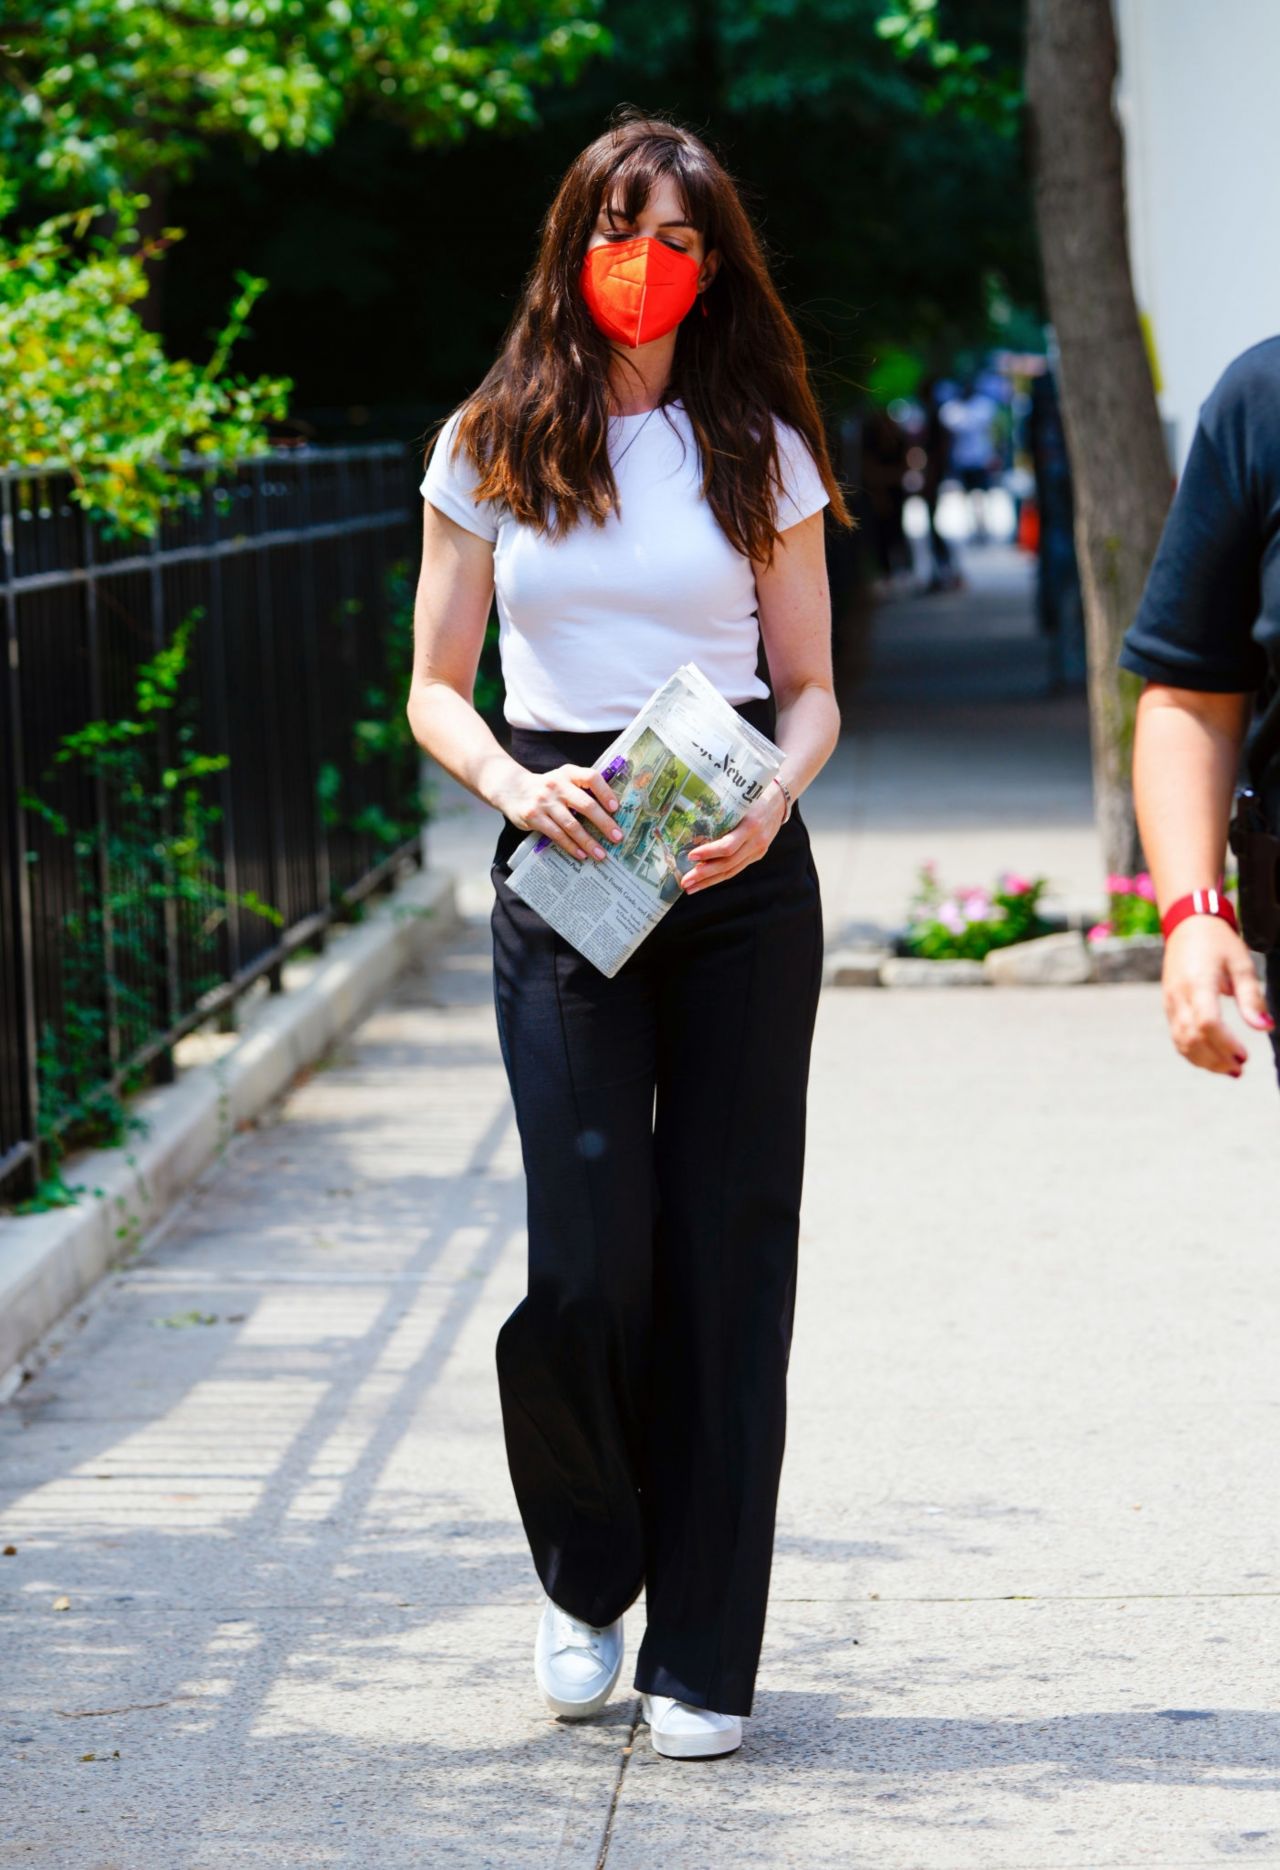 anne-hathaway-in-casual-outfit-new-york-city-07-26-2021-2-166399016681671322128-1664028378510-16640283793681060051502.jpg